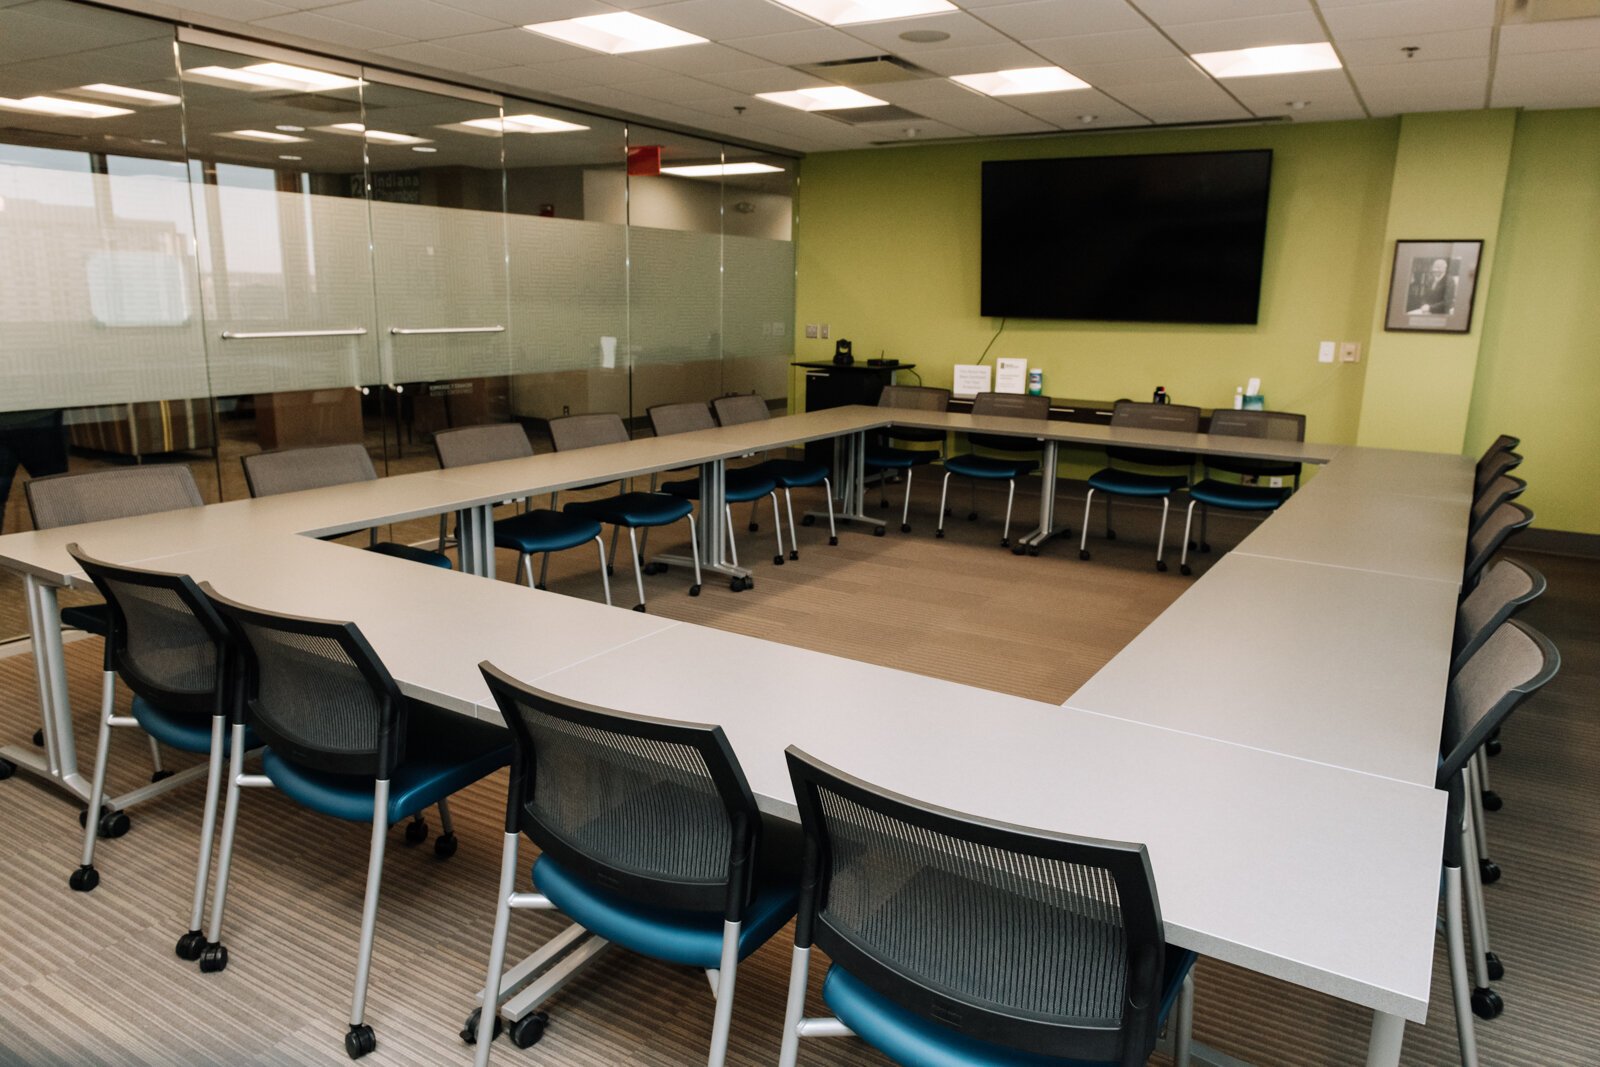 Conferences rooms at Greater Fort Wayne, Inc.